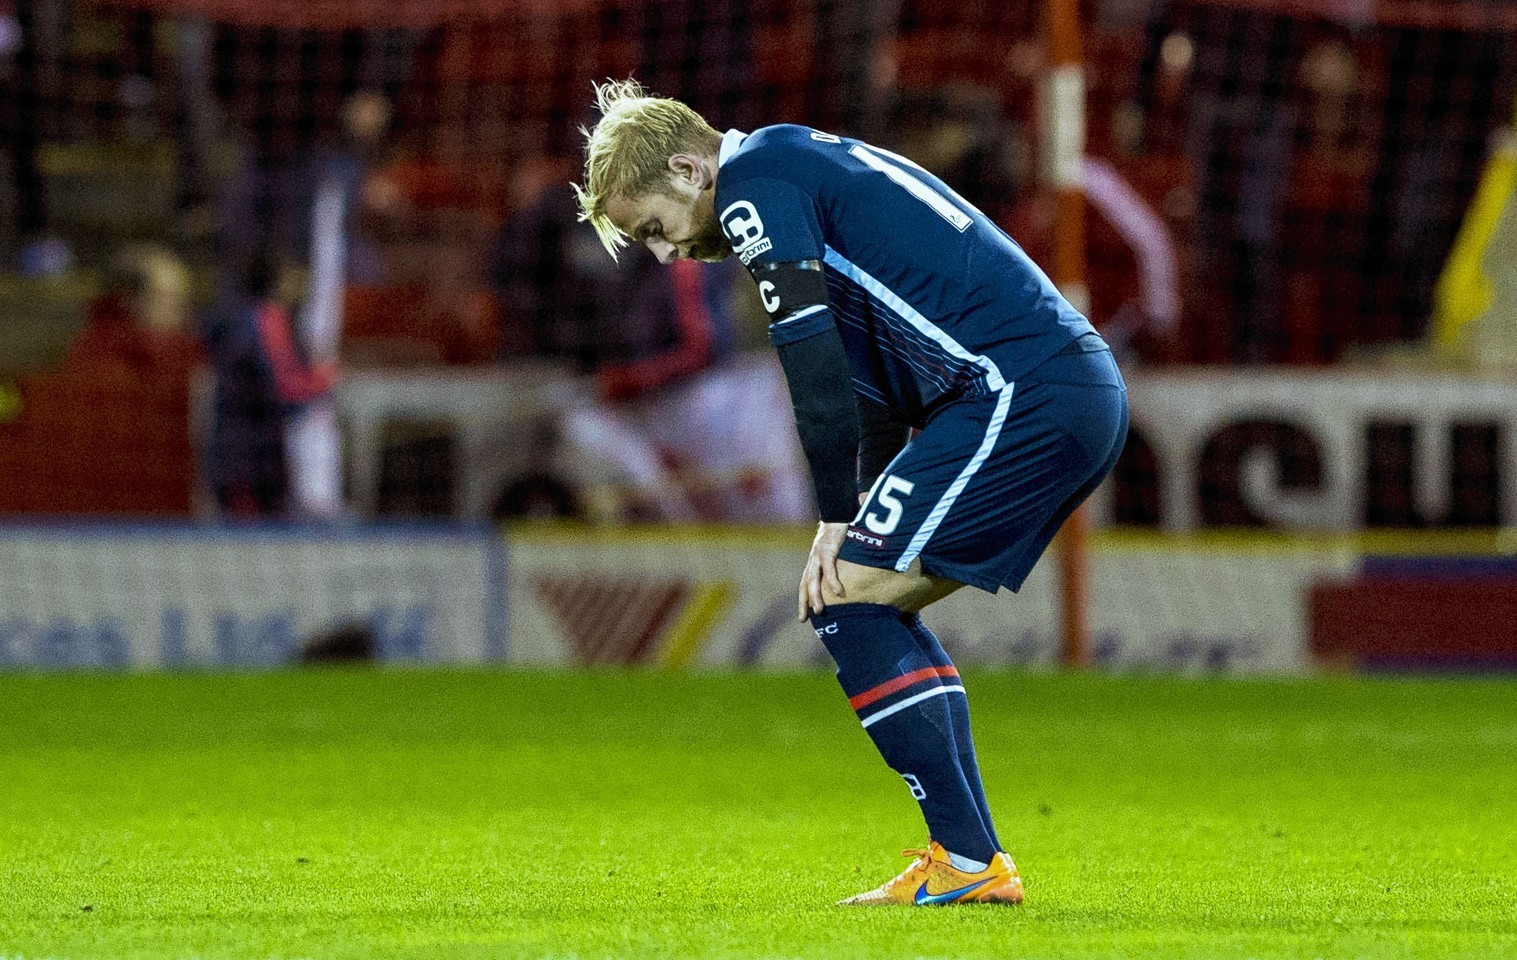 Dejection for Ross County captain Andrew Davies at full-time